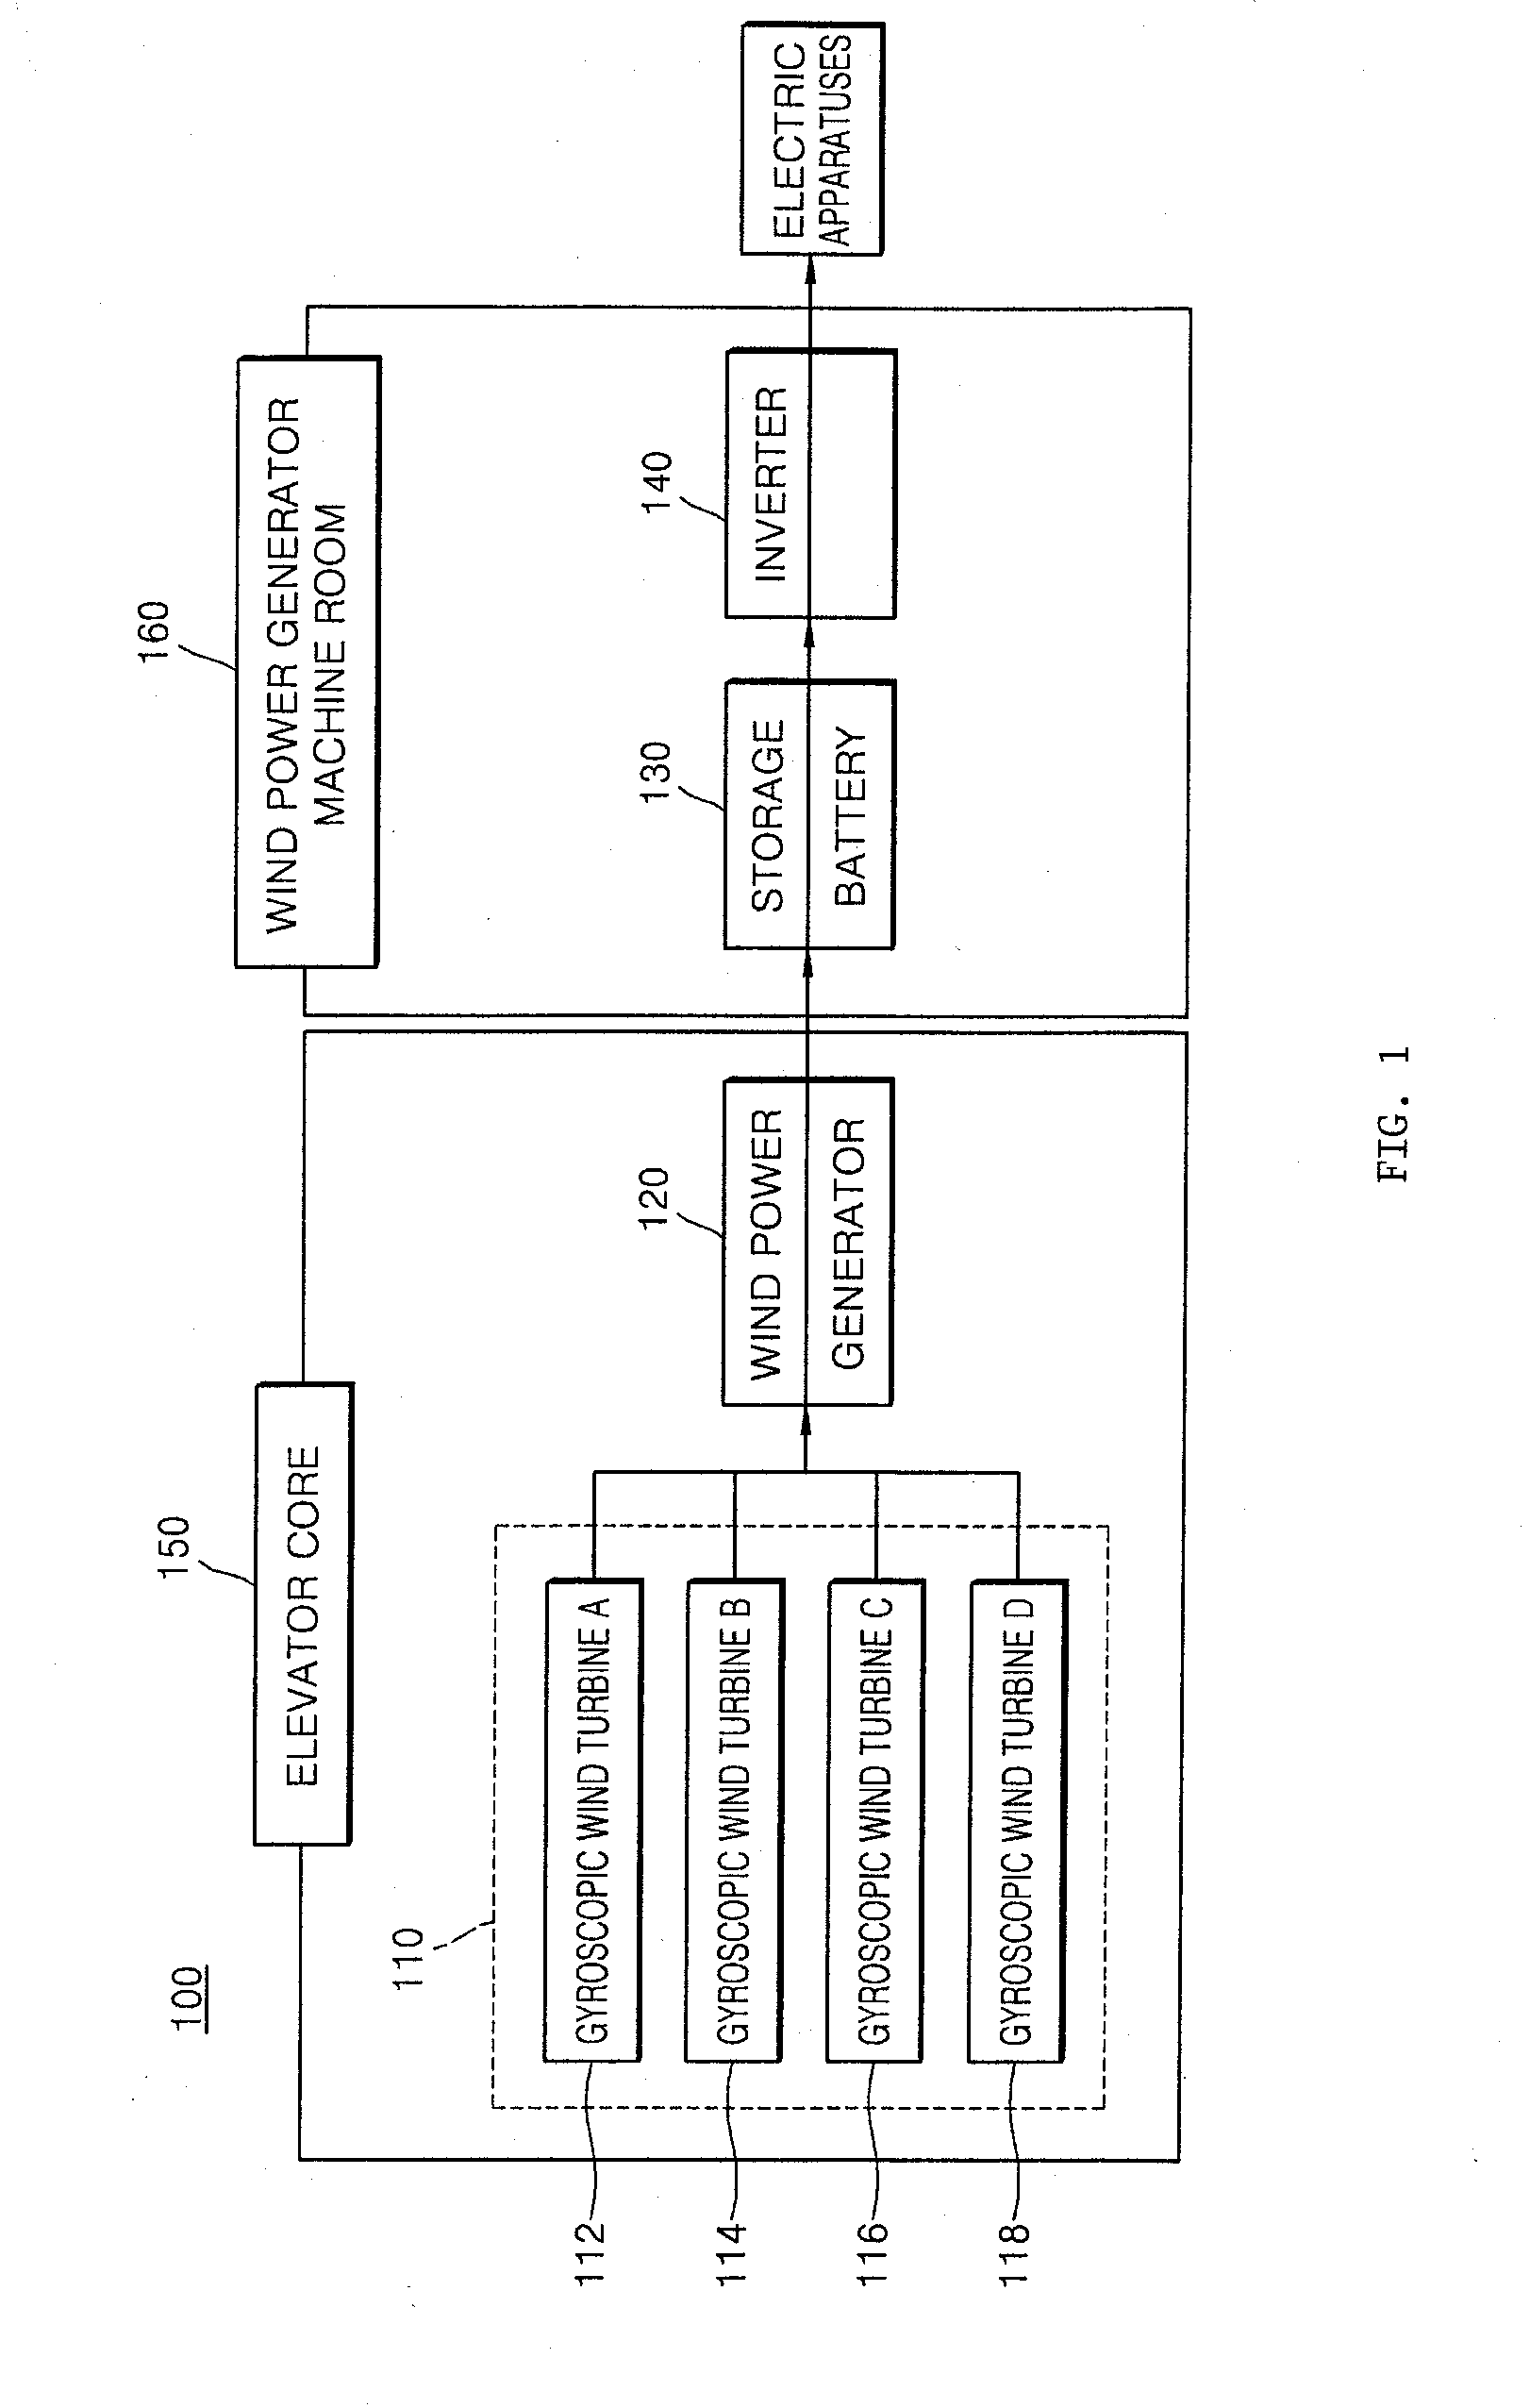 Wind power generation system and method using stack effect of high-speed elevator in high-rise building